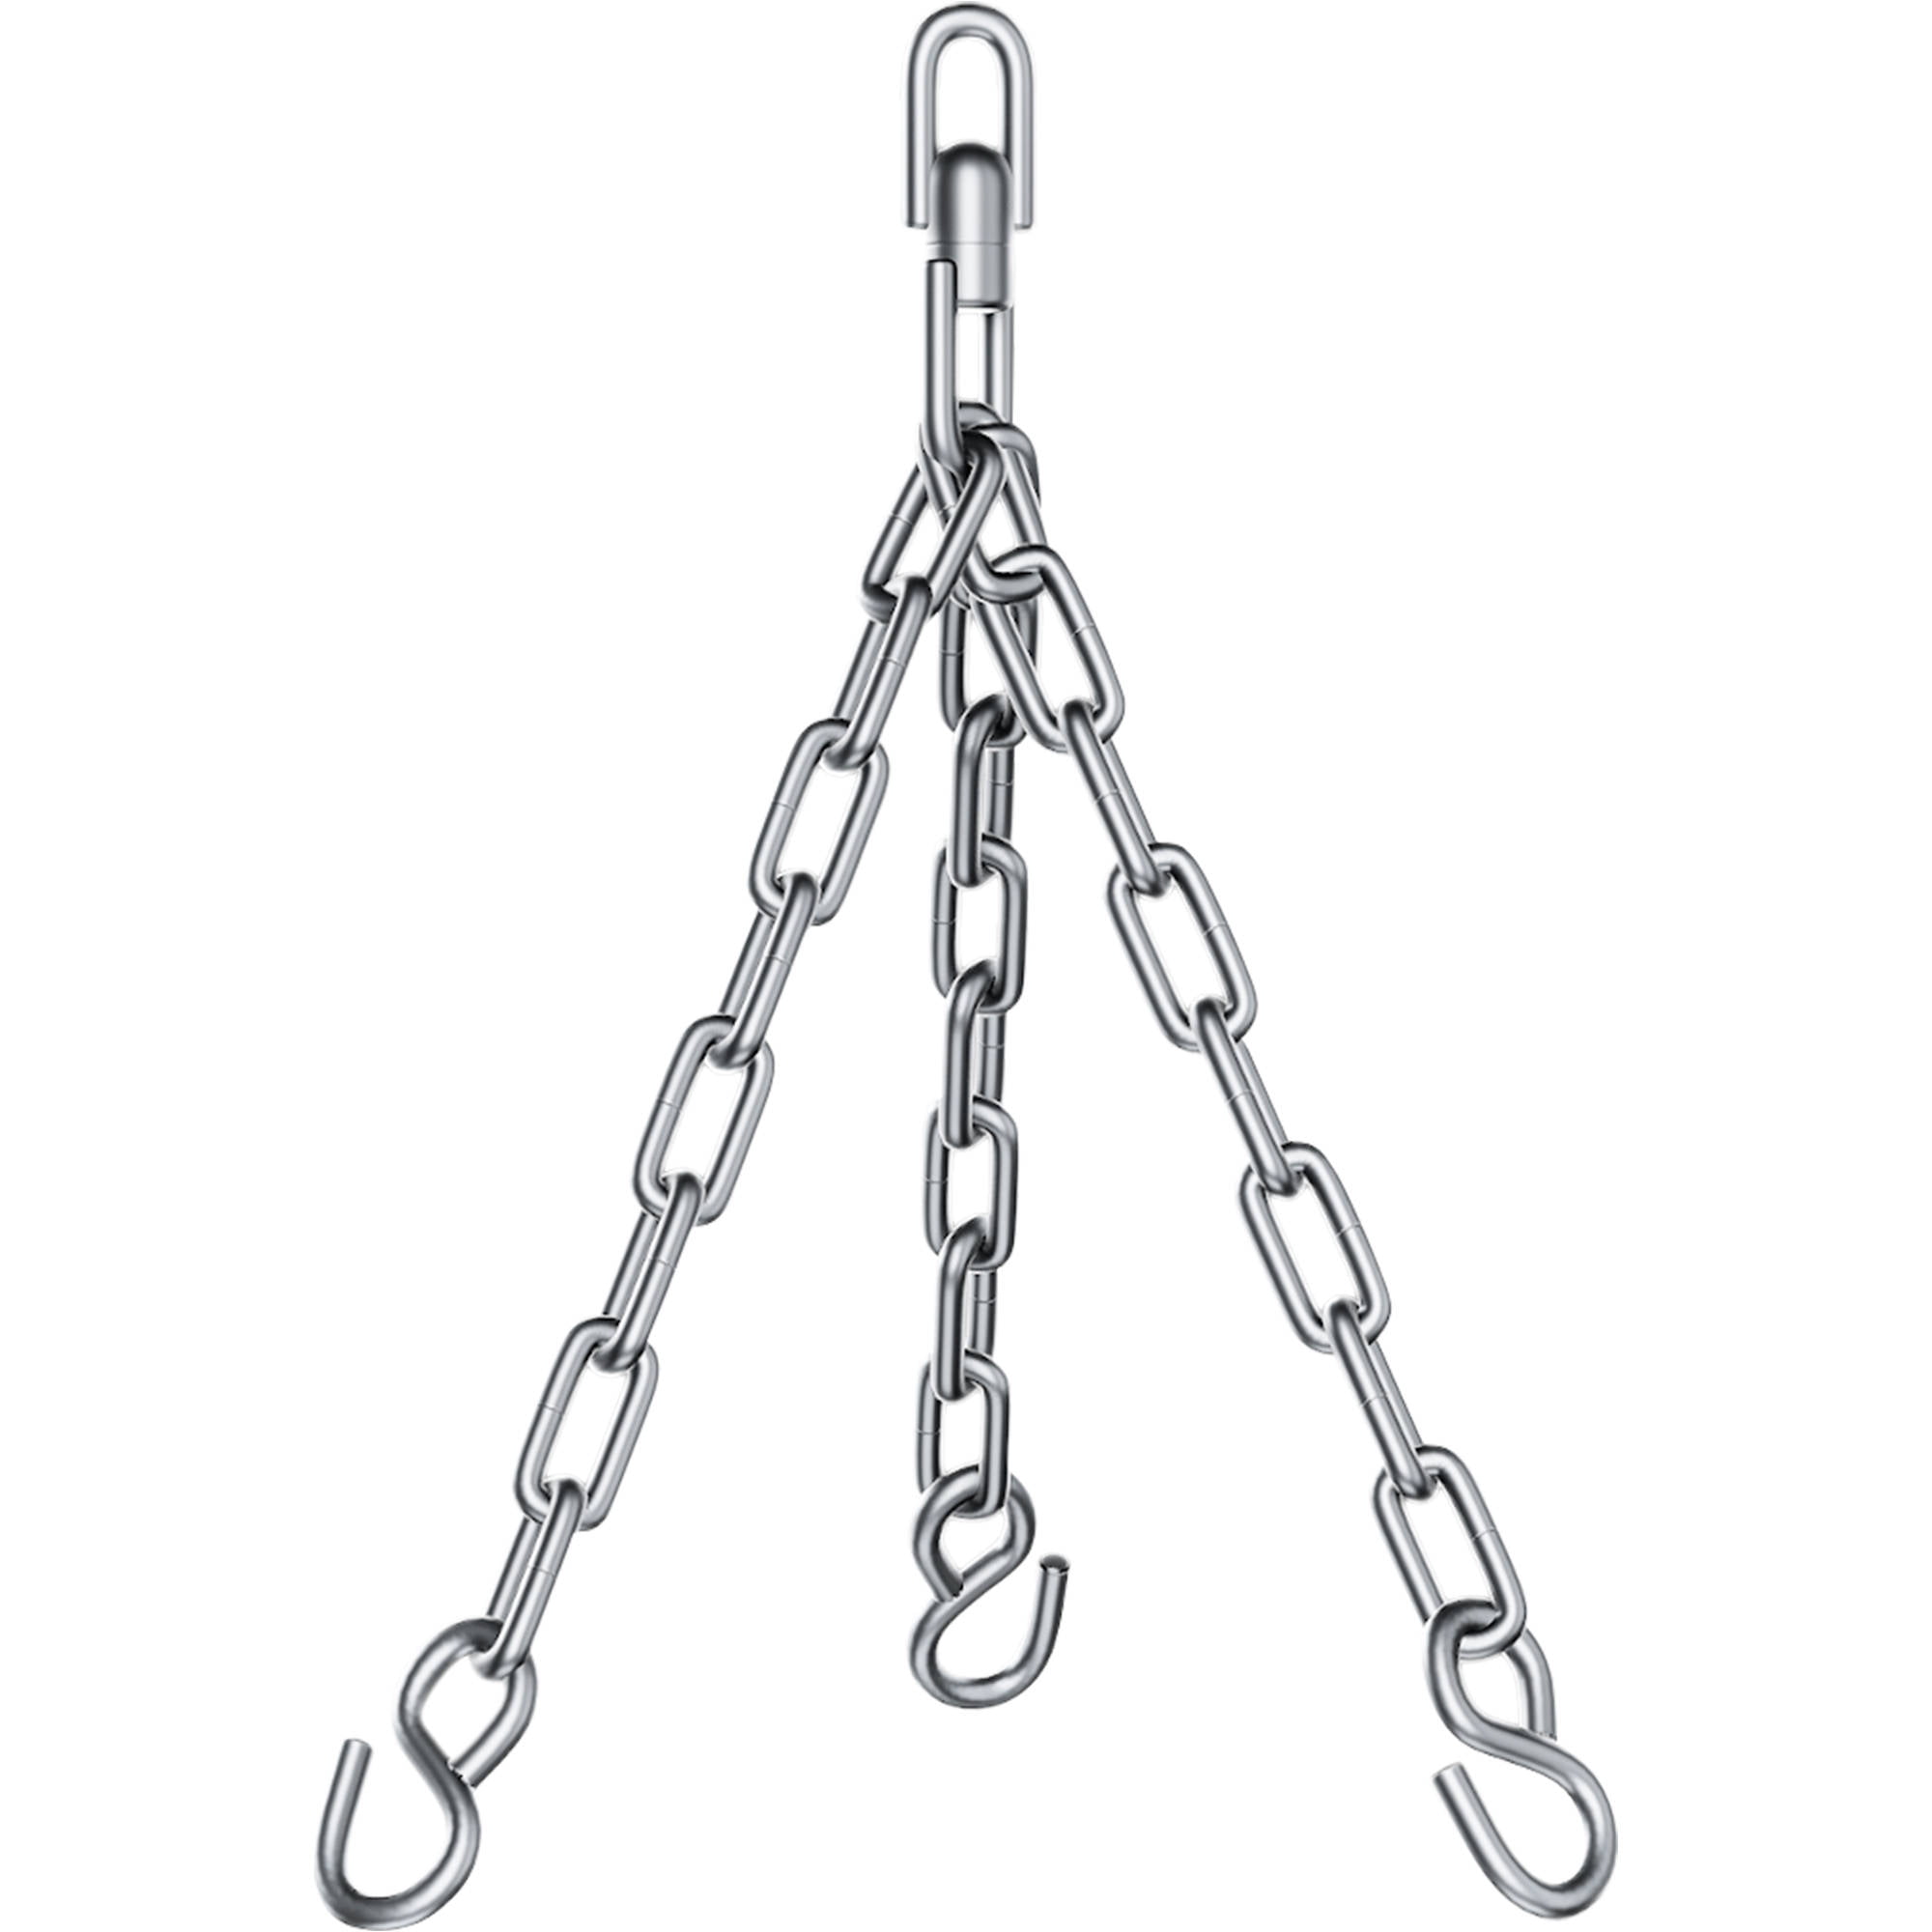 Details about   AQF 4 Strand Hanging Steel Chain & Swivel Boxing Punch Bag Chain Heavy Duty MMA 